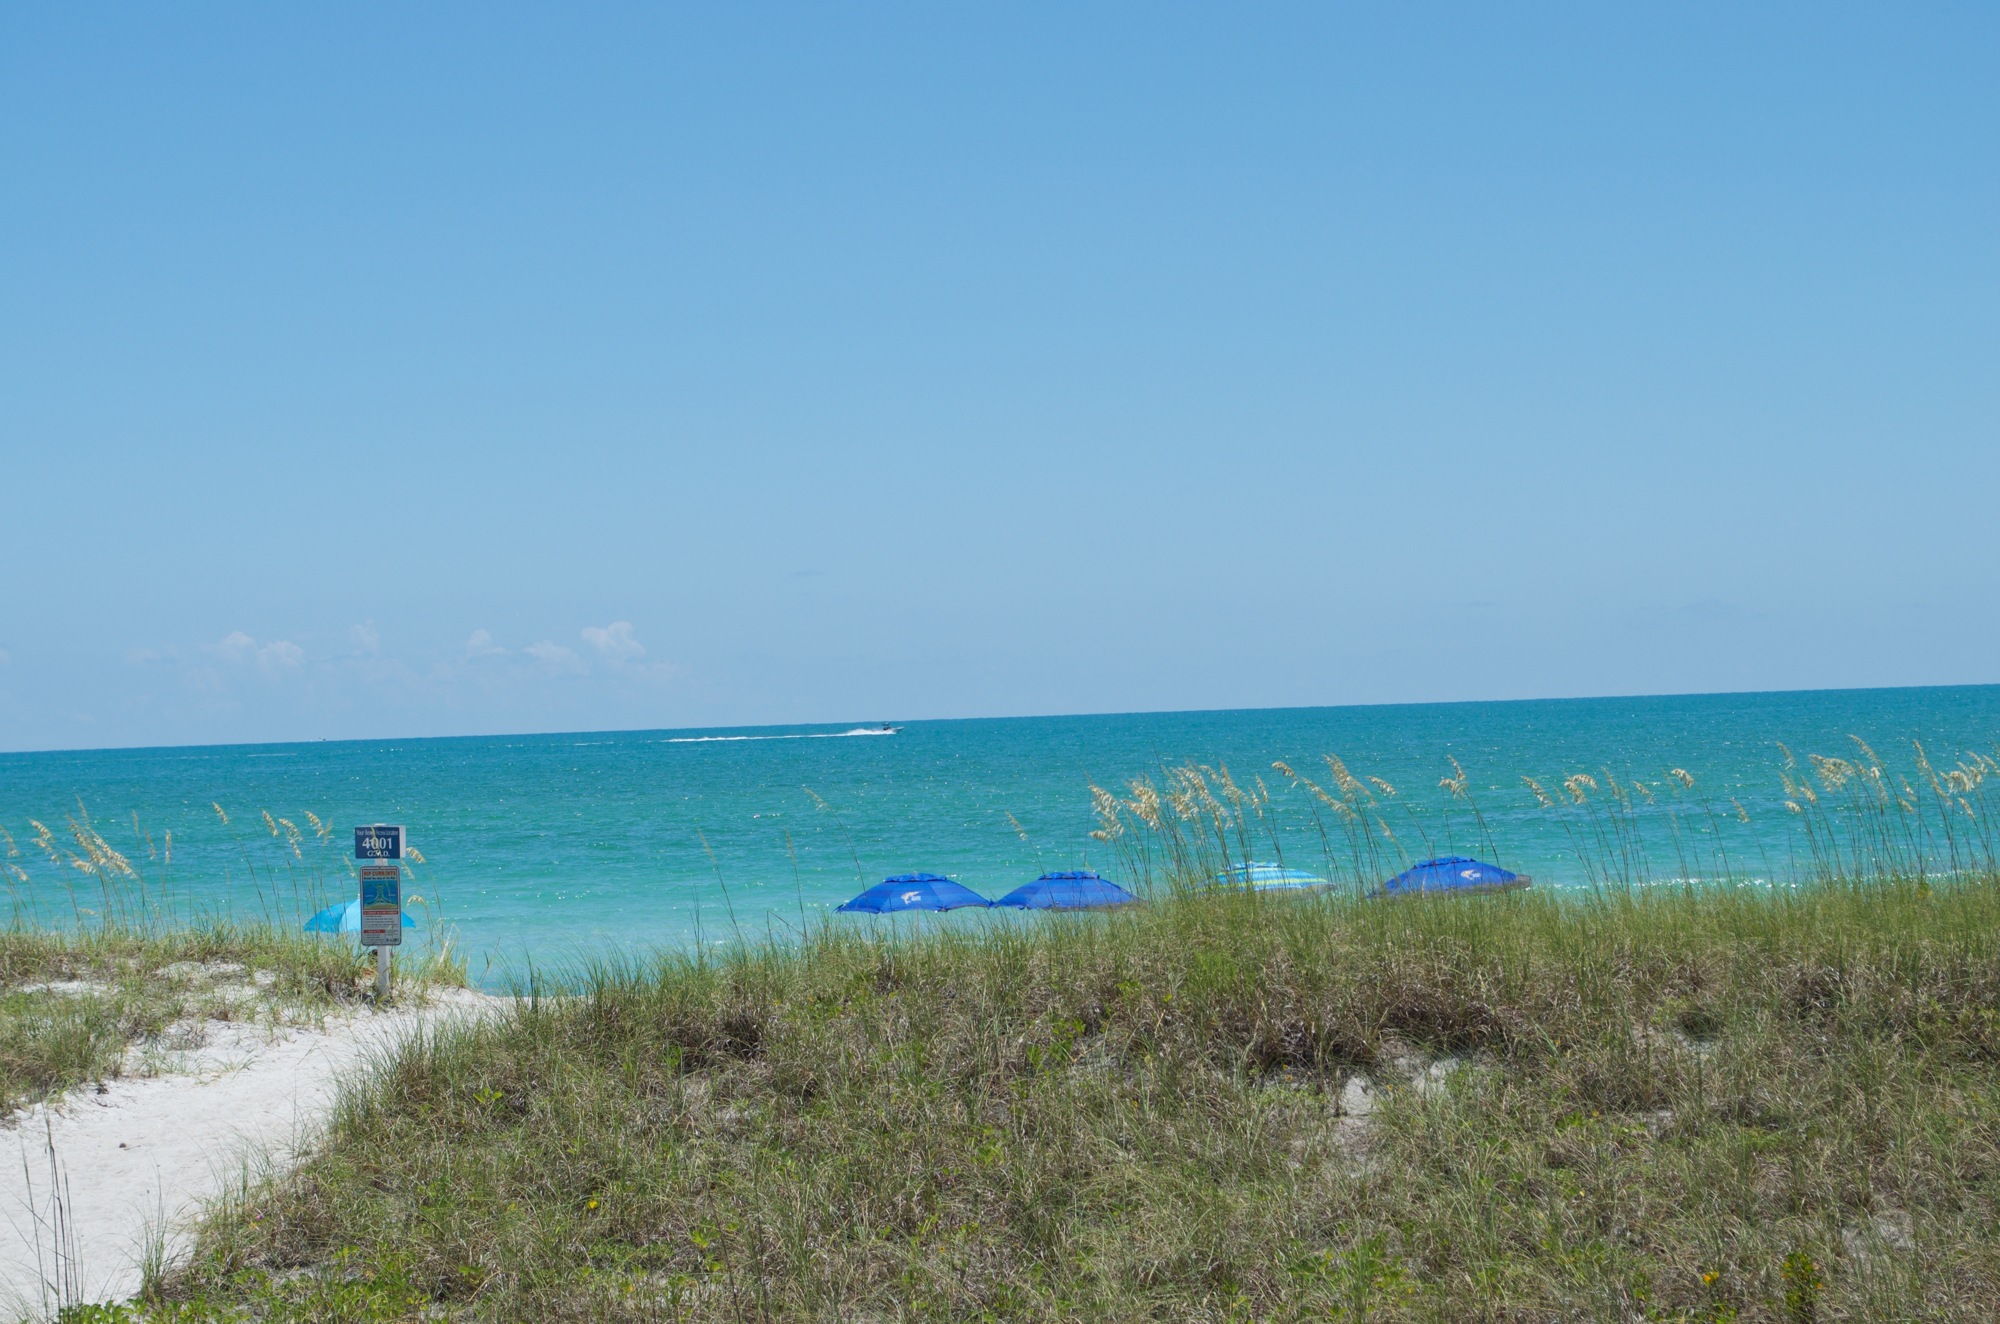 In total, about 900,000 cubic yards of sand is proposed for Longboat Key beaches.